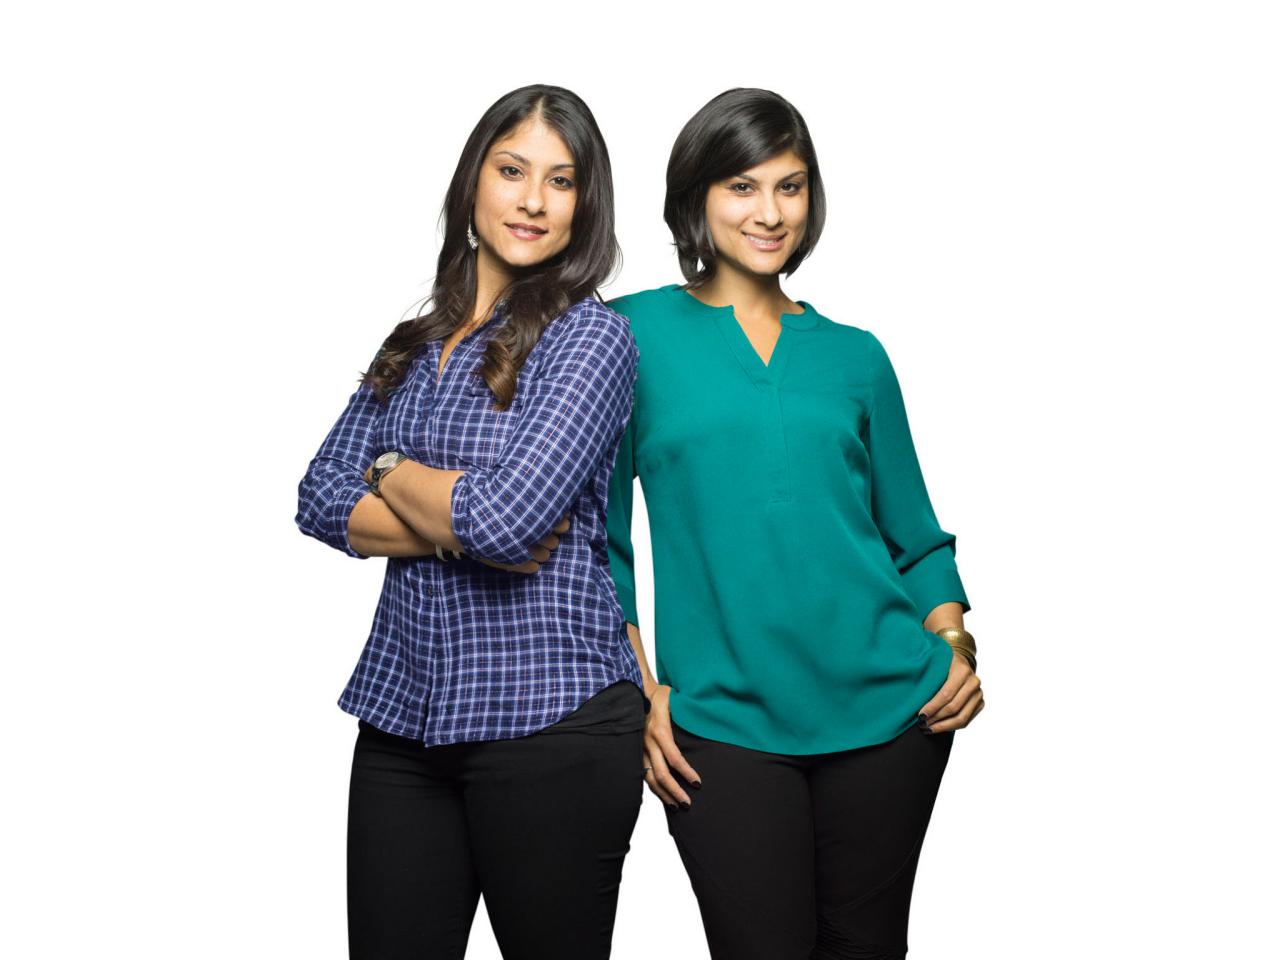  Meet the Hosts of HGTV's Listed Sisters: Alana and Lex LeBlanc | Listed Sisters